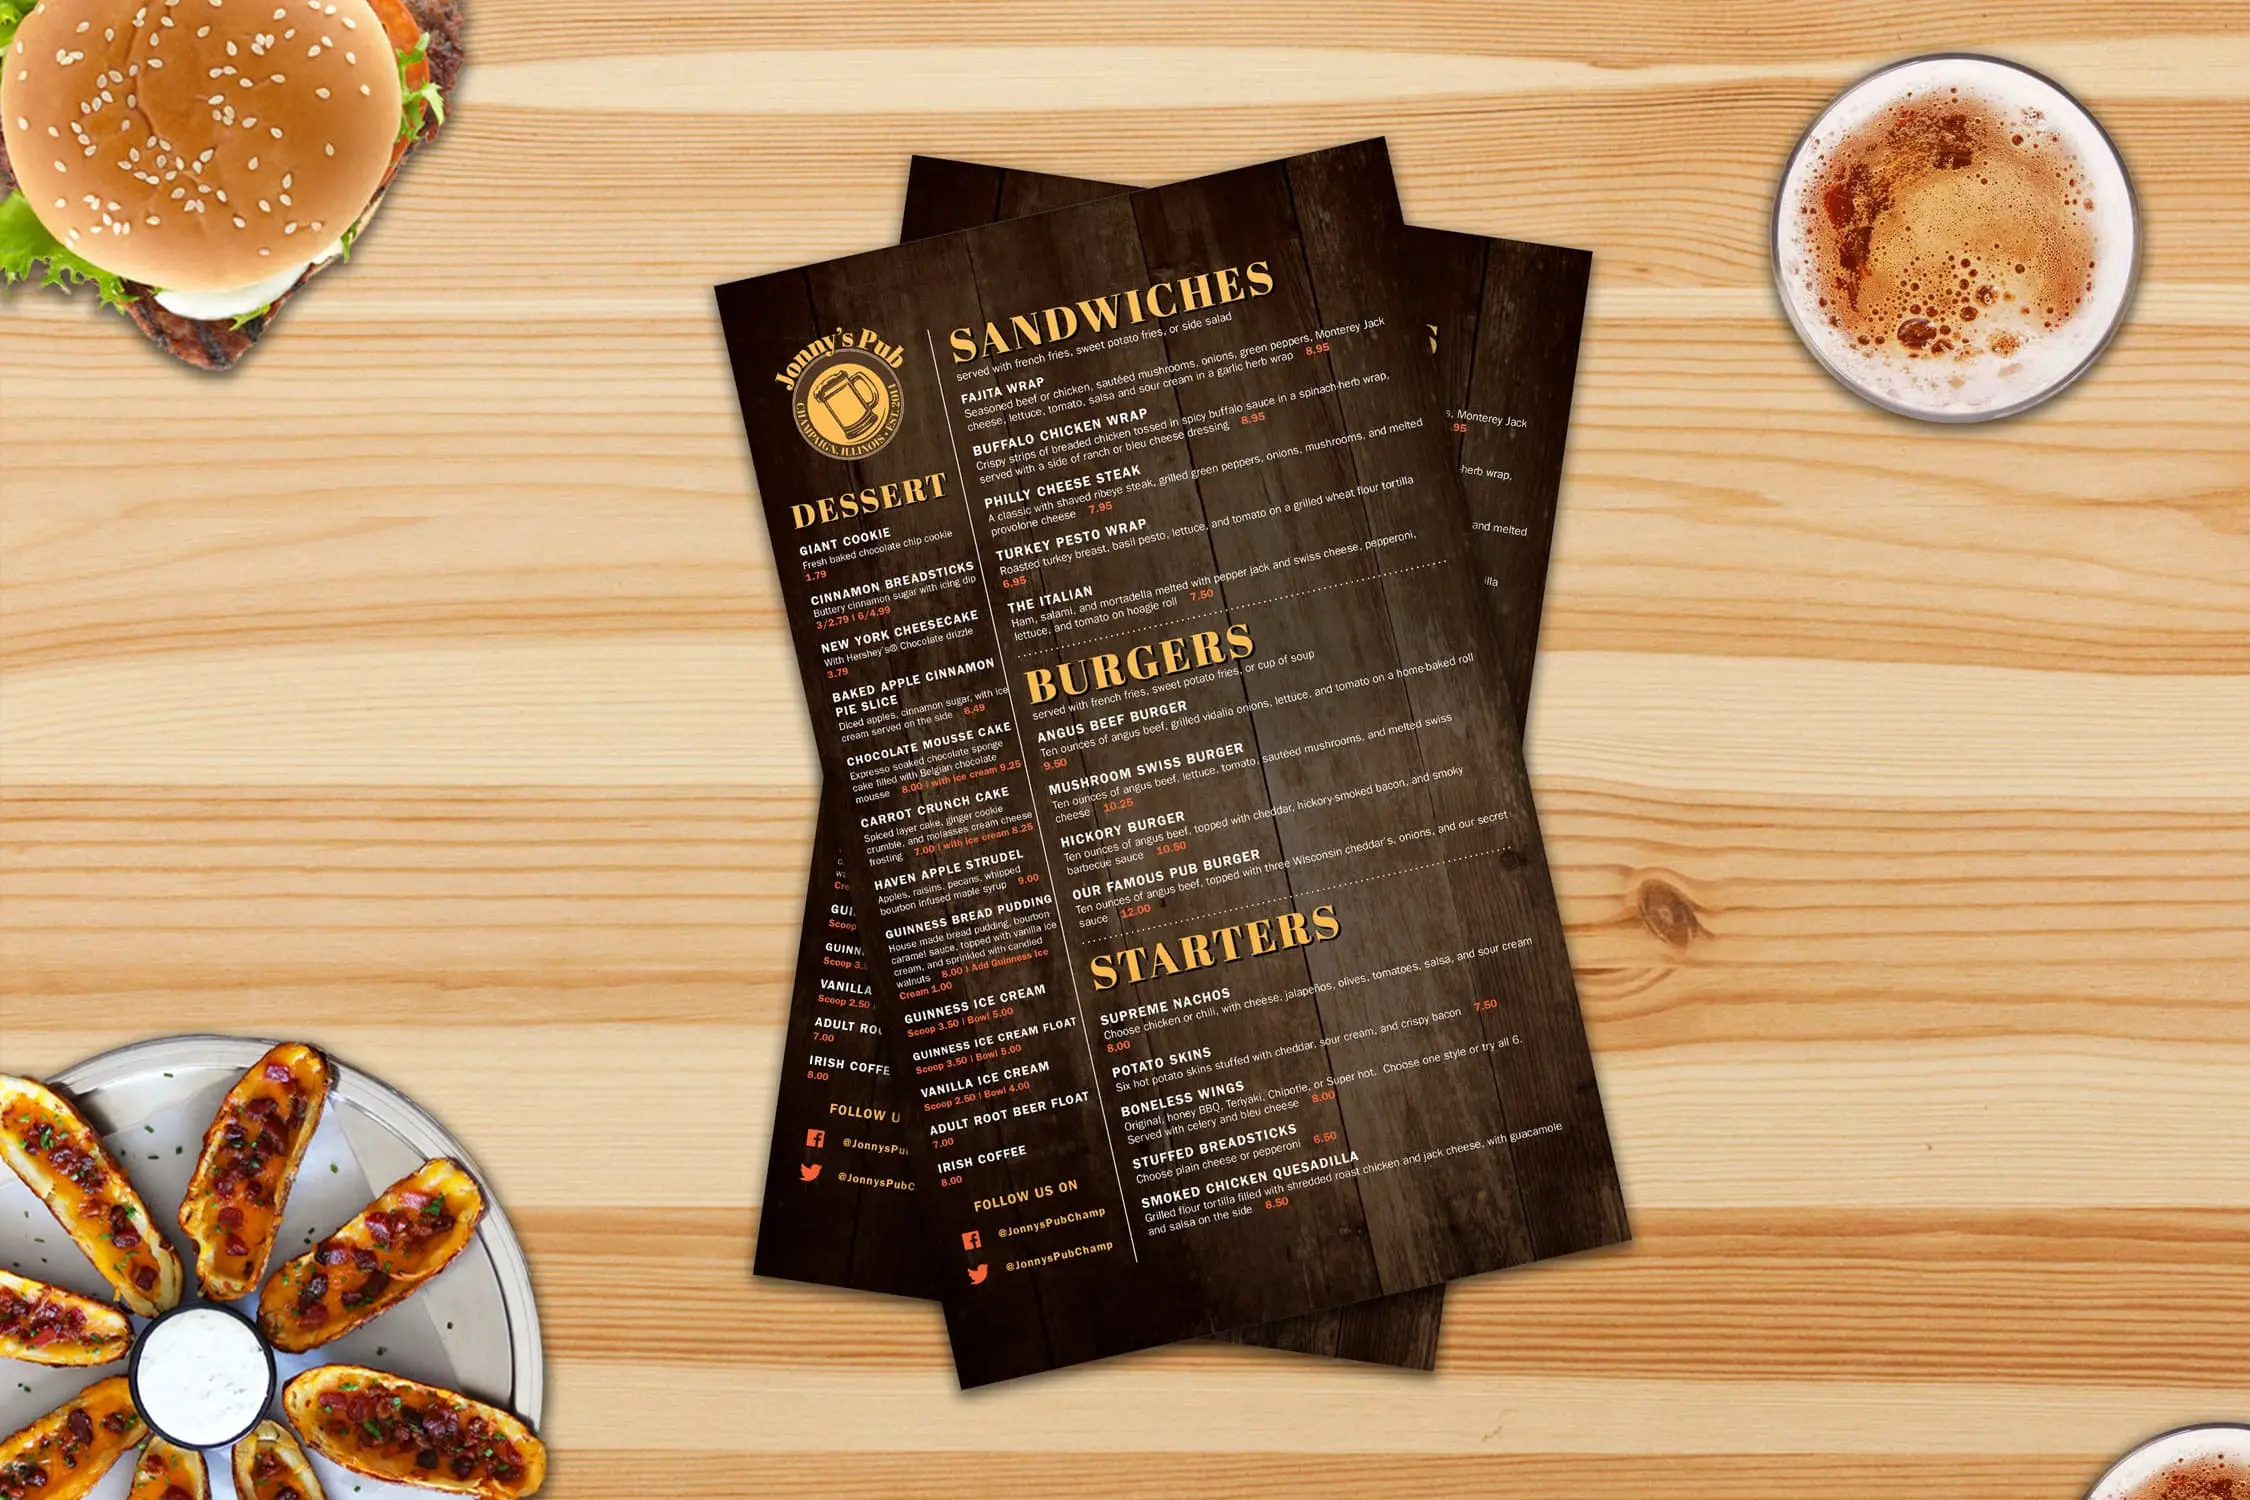 jonny's pub menus with burgers, beer, and potato skins on a table